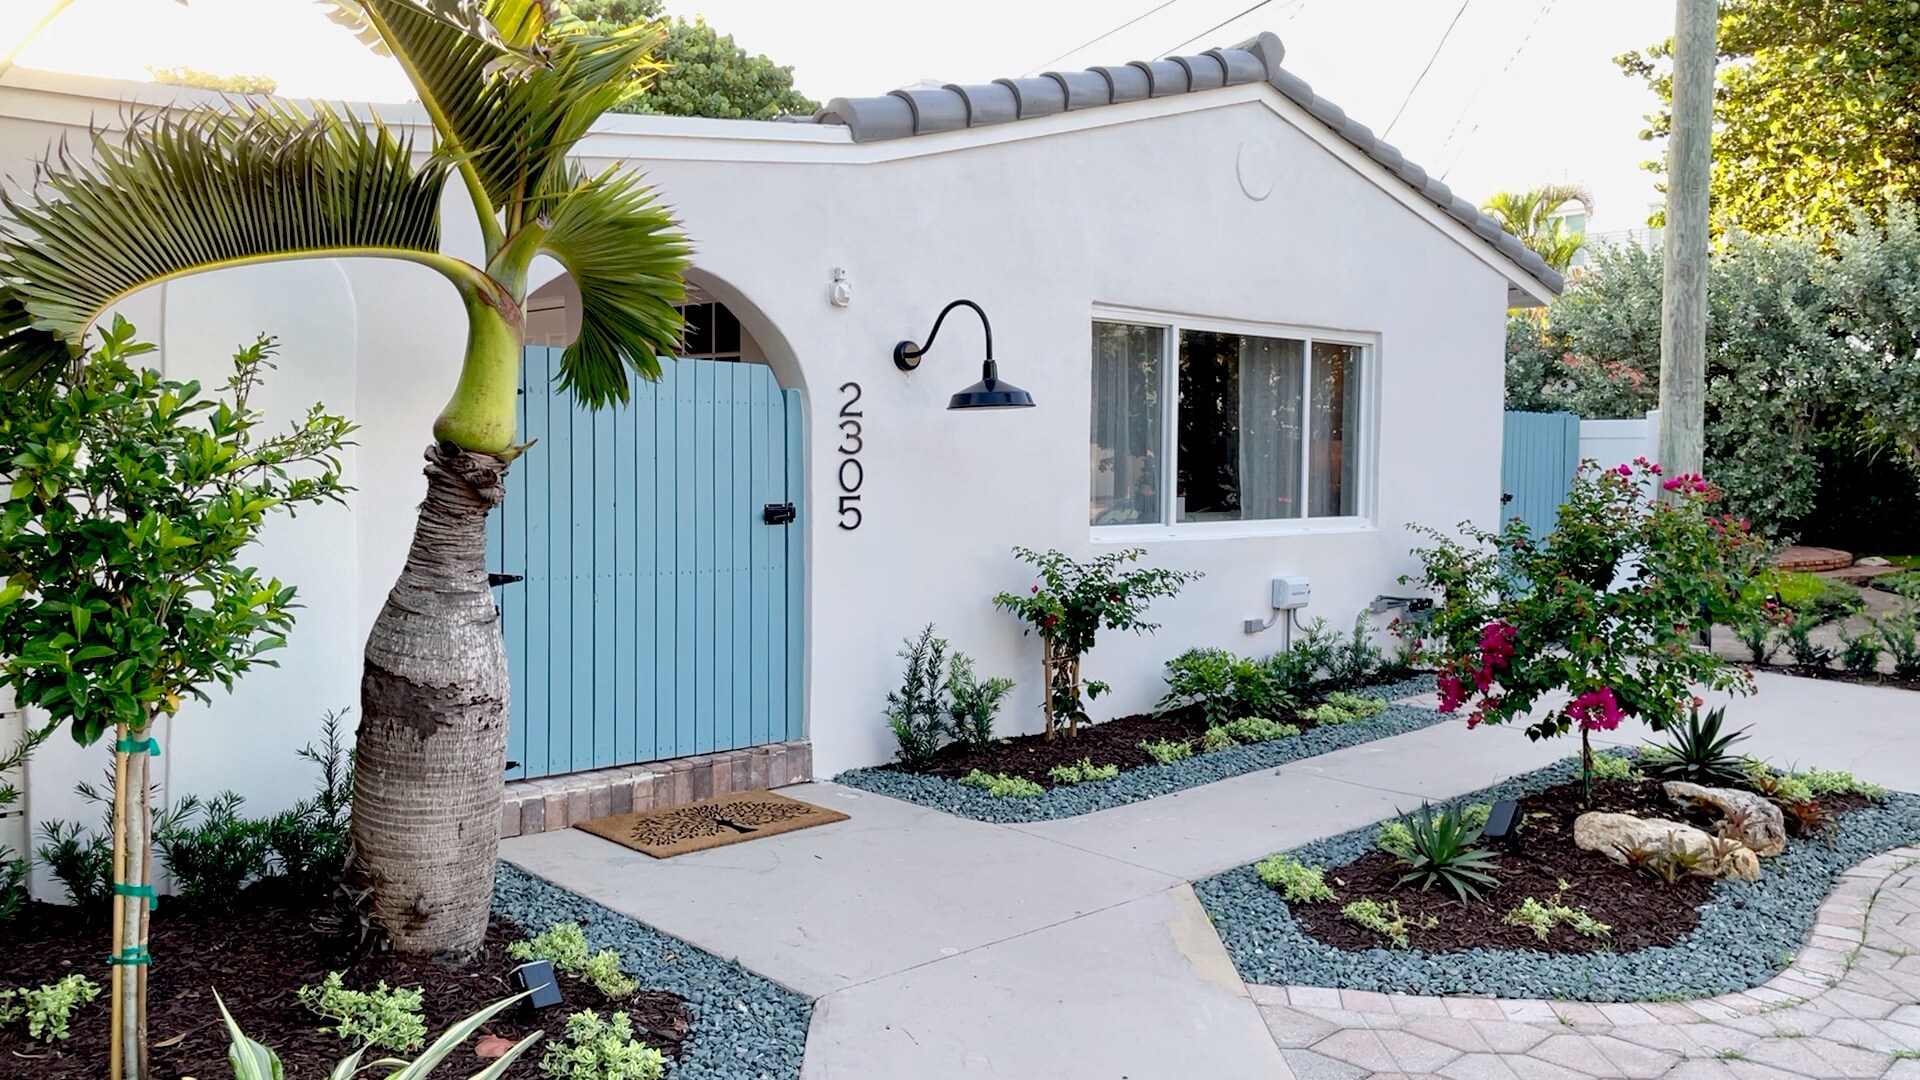 House #2 is Surf Key - A quiet 3 Bed/4 Bath home that provides the perfect mix of open social areas, and tranquil private areas!